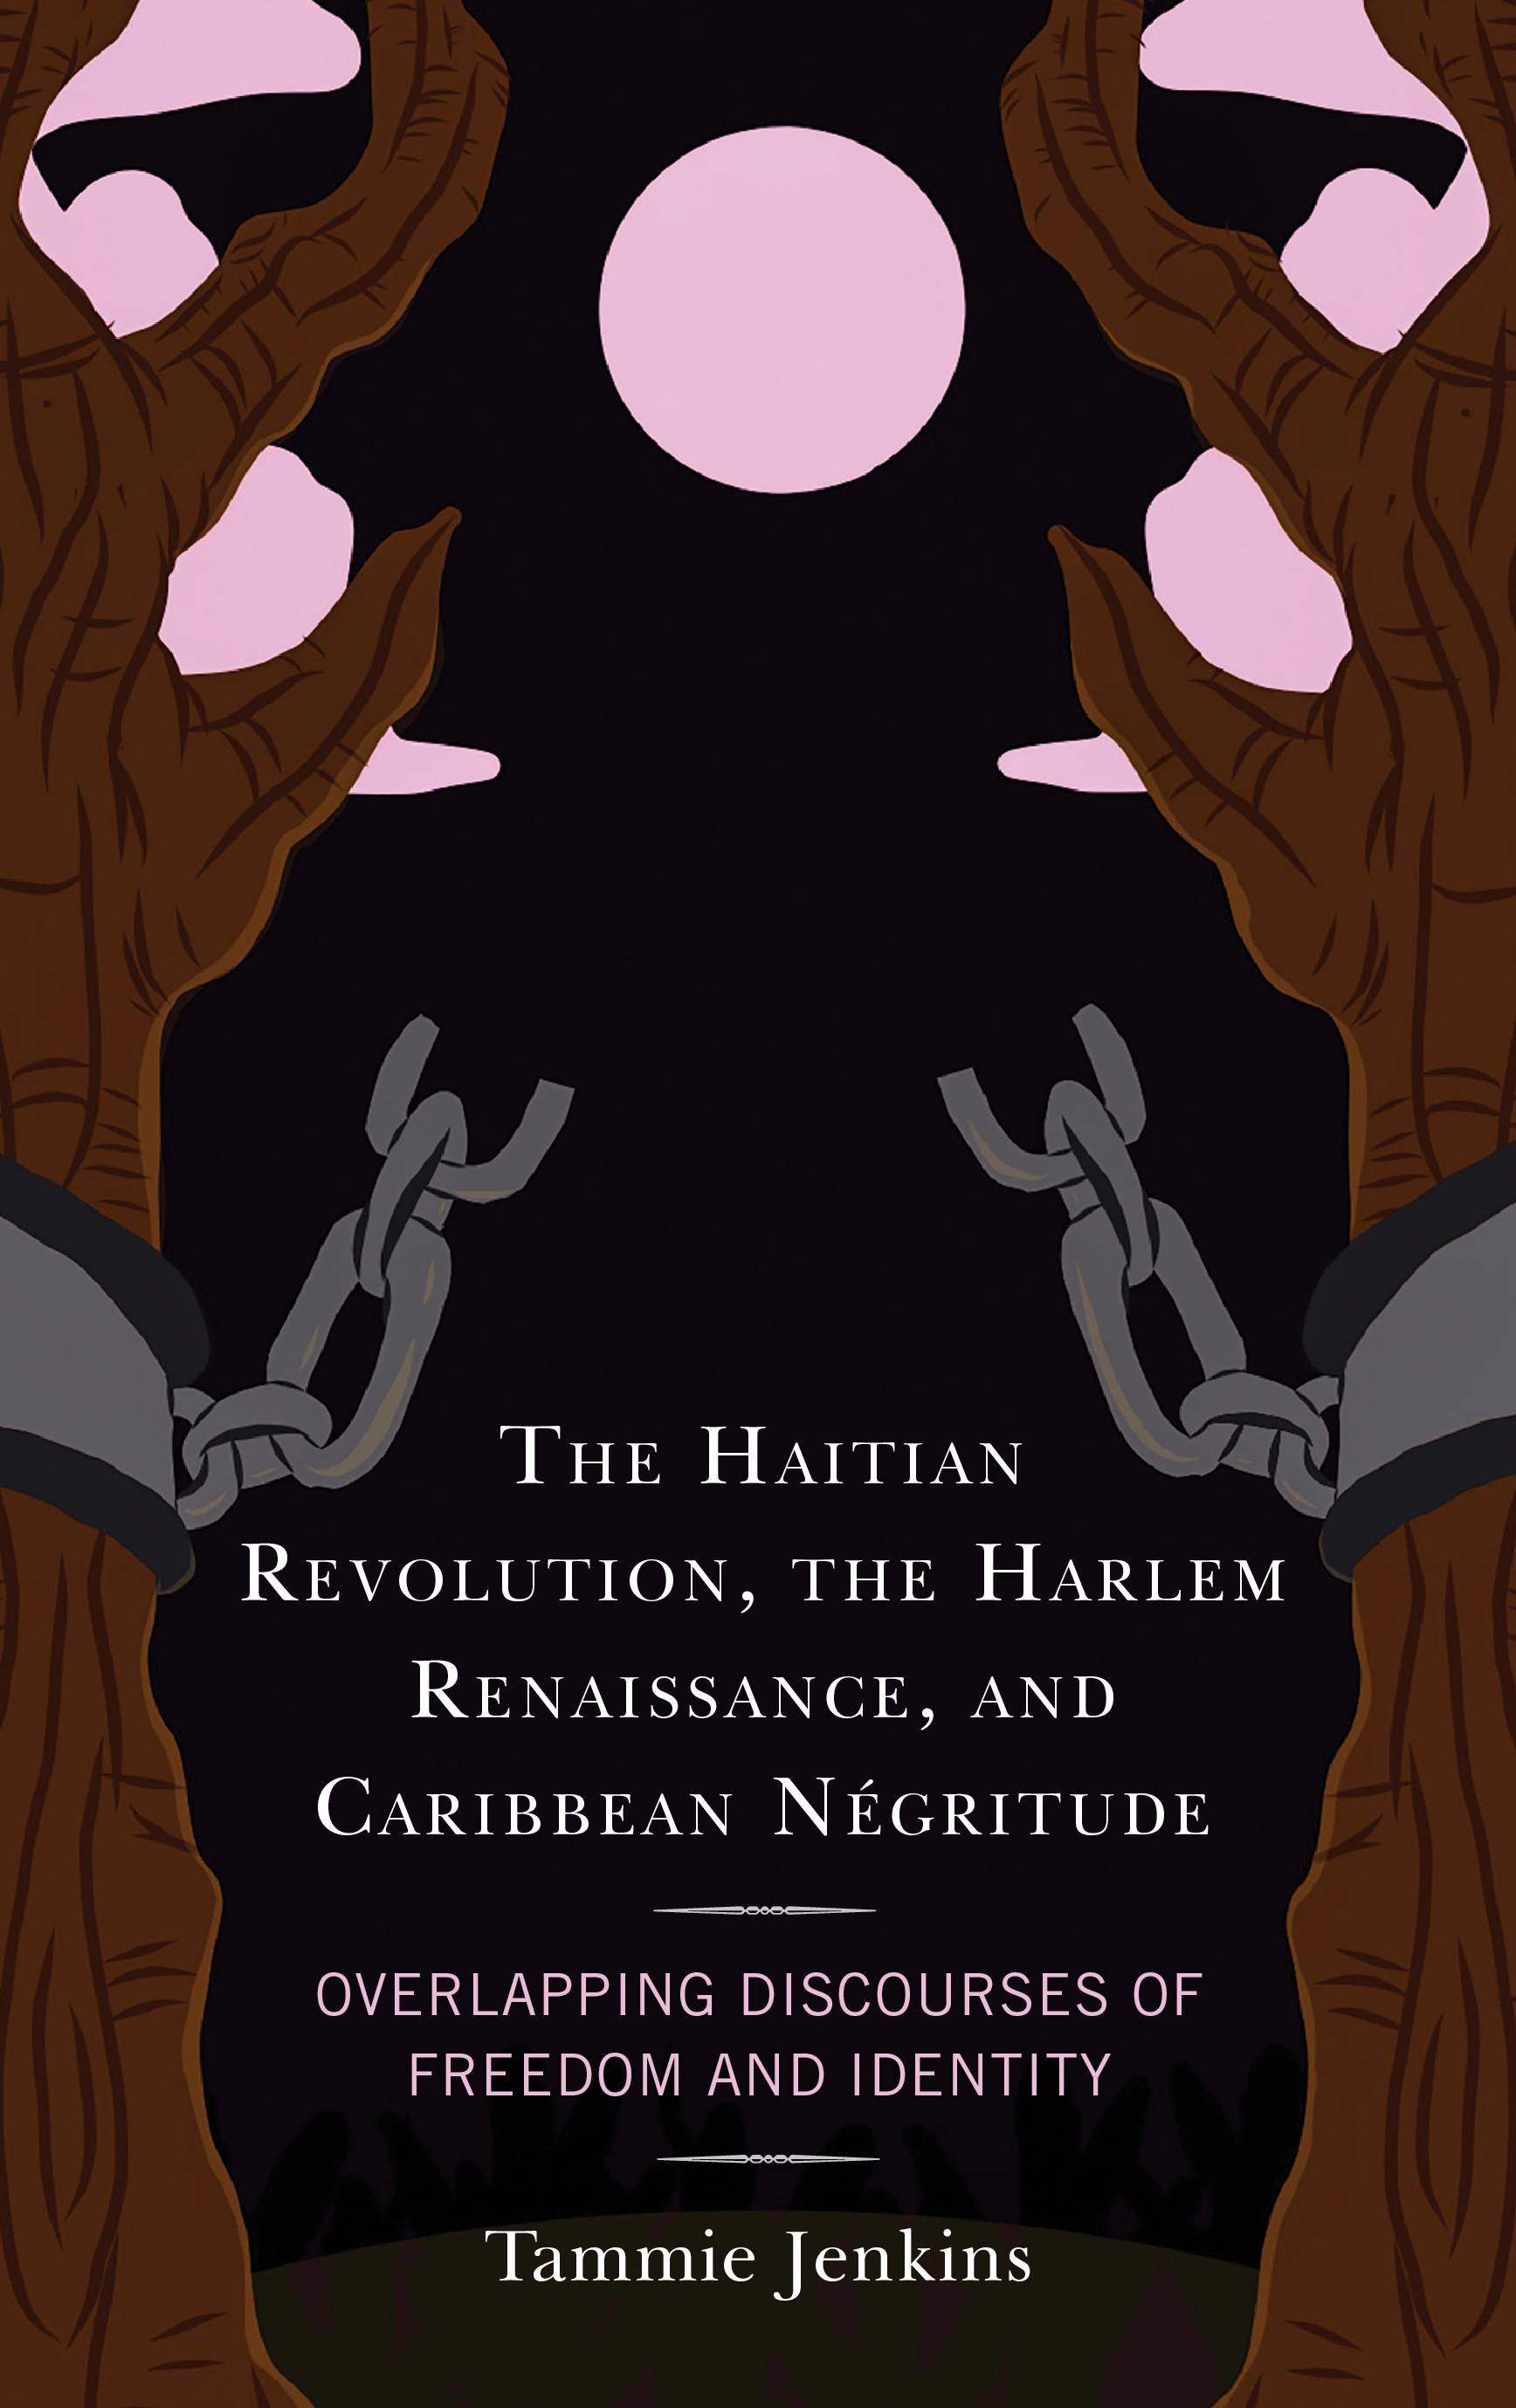 The Haitian Revolution, the Harlem Renaissance, and Caribbean Négritude: Overlapping Discourses of Freedom and Identity